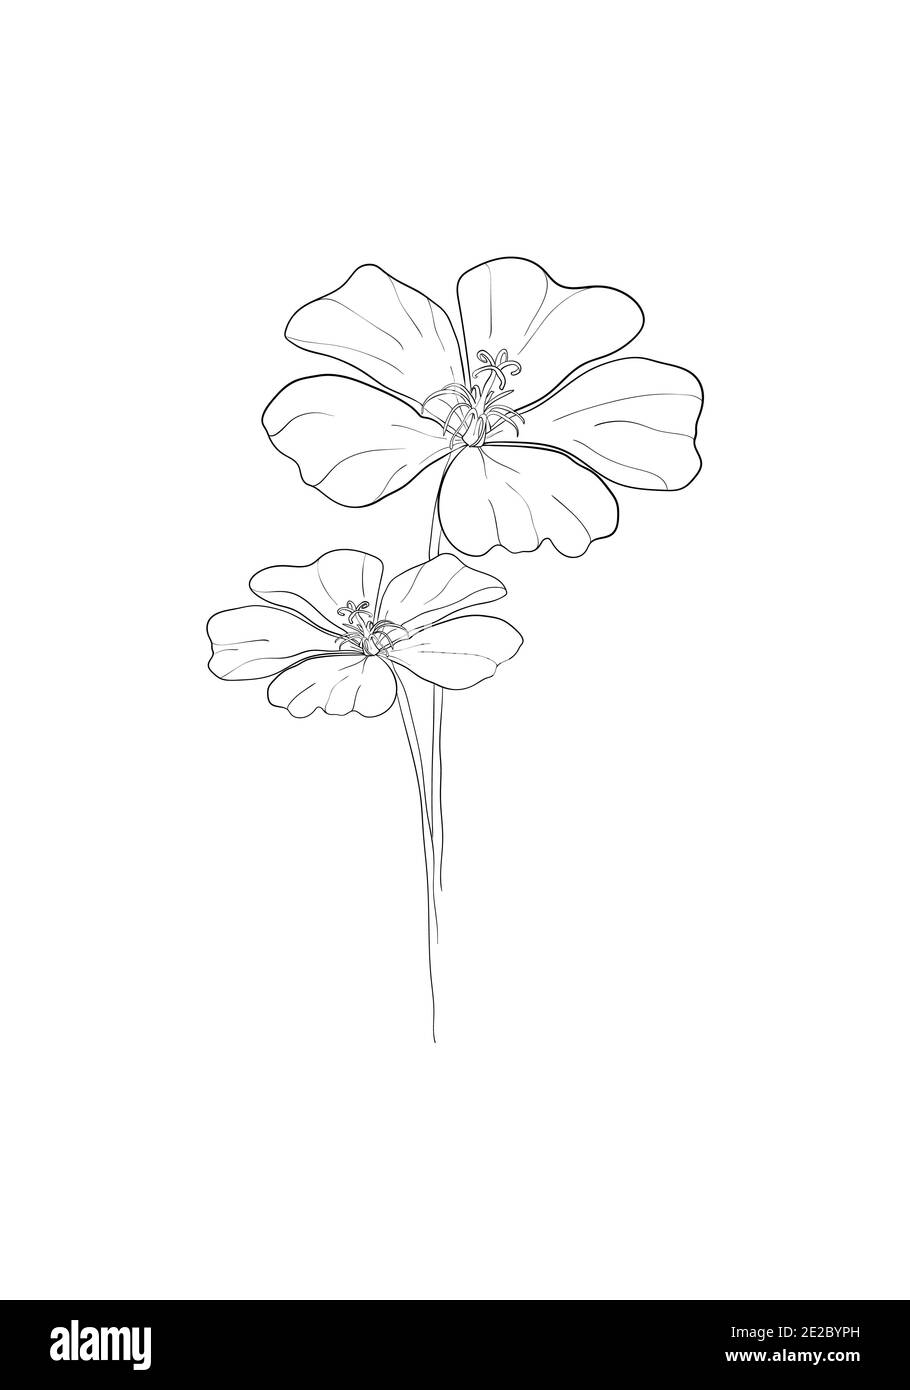 line art-Poppy flower Minimalist contour drawing. One line artwork,floral pattern for design linear art on a white background. Stock Photo